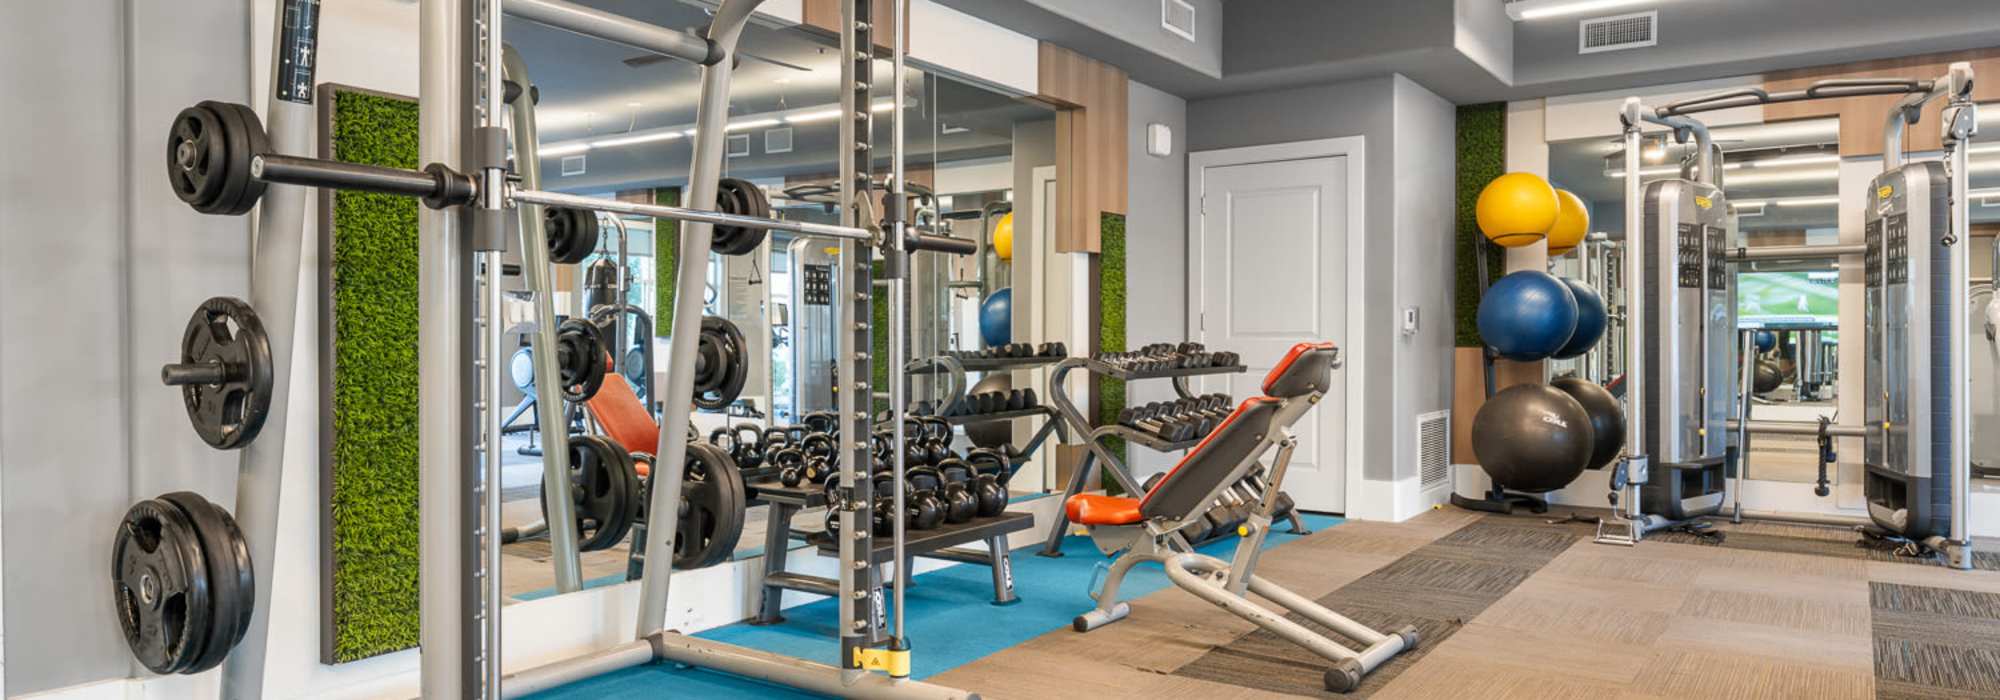 Well-equipped fitness center at The Hyve in Tempe, Arizona